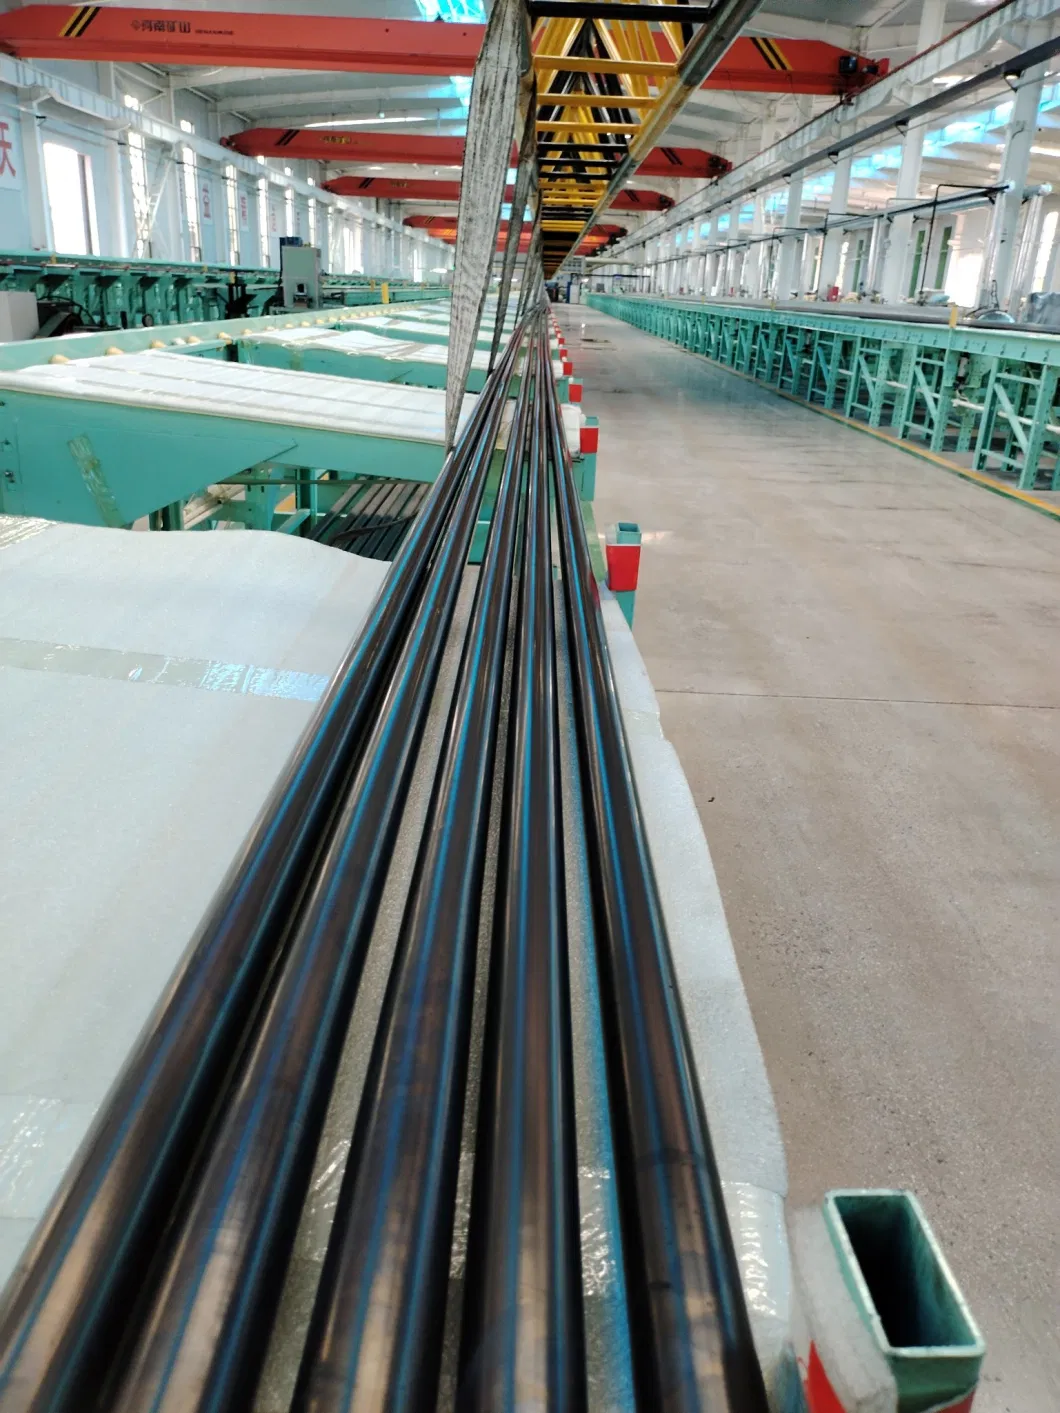 SAE100r1 DIN En 853 1sn Flexible Series Hydraulic Rubber Hose Pipe Tube Factory Standard Size Oil Resistant